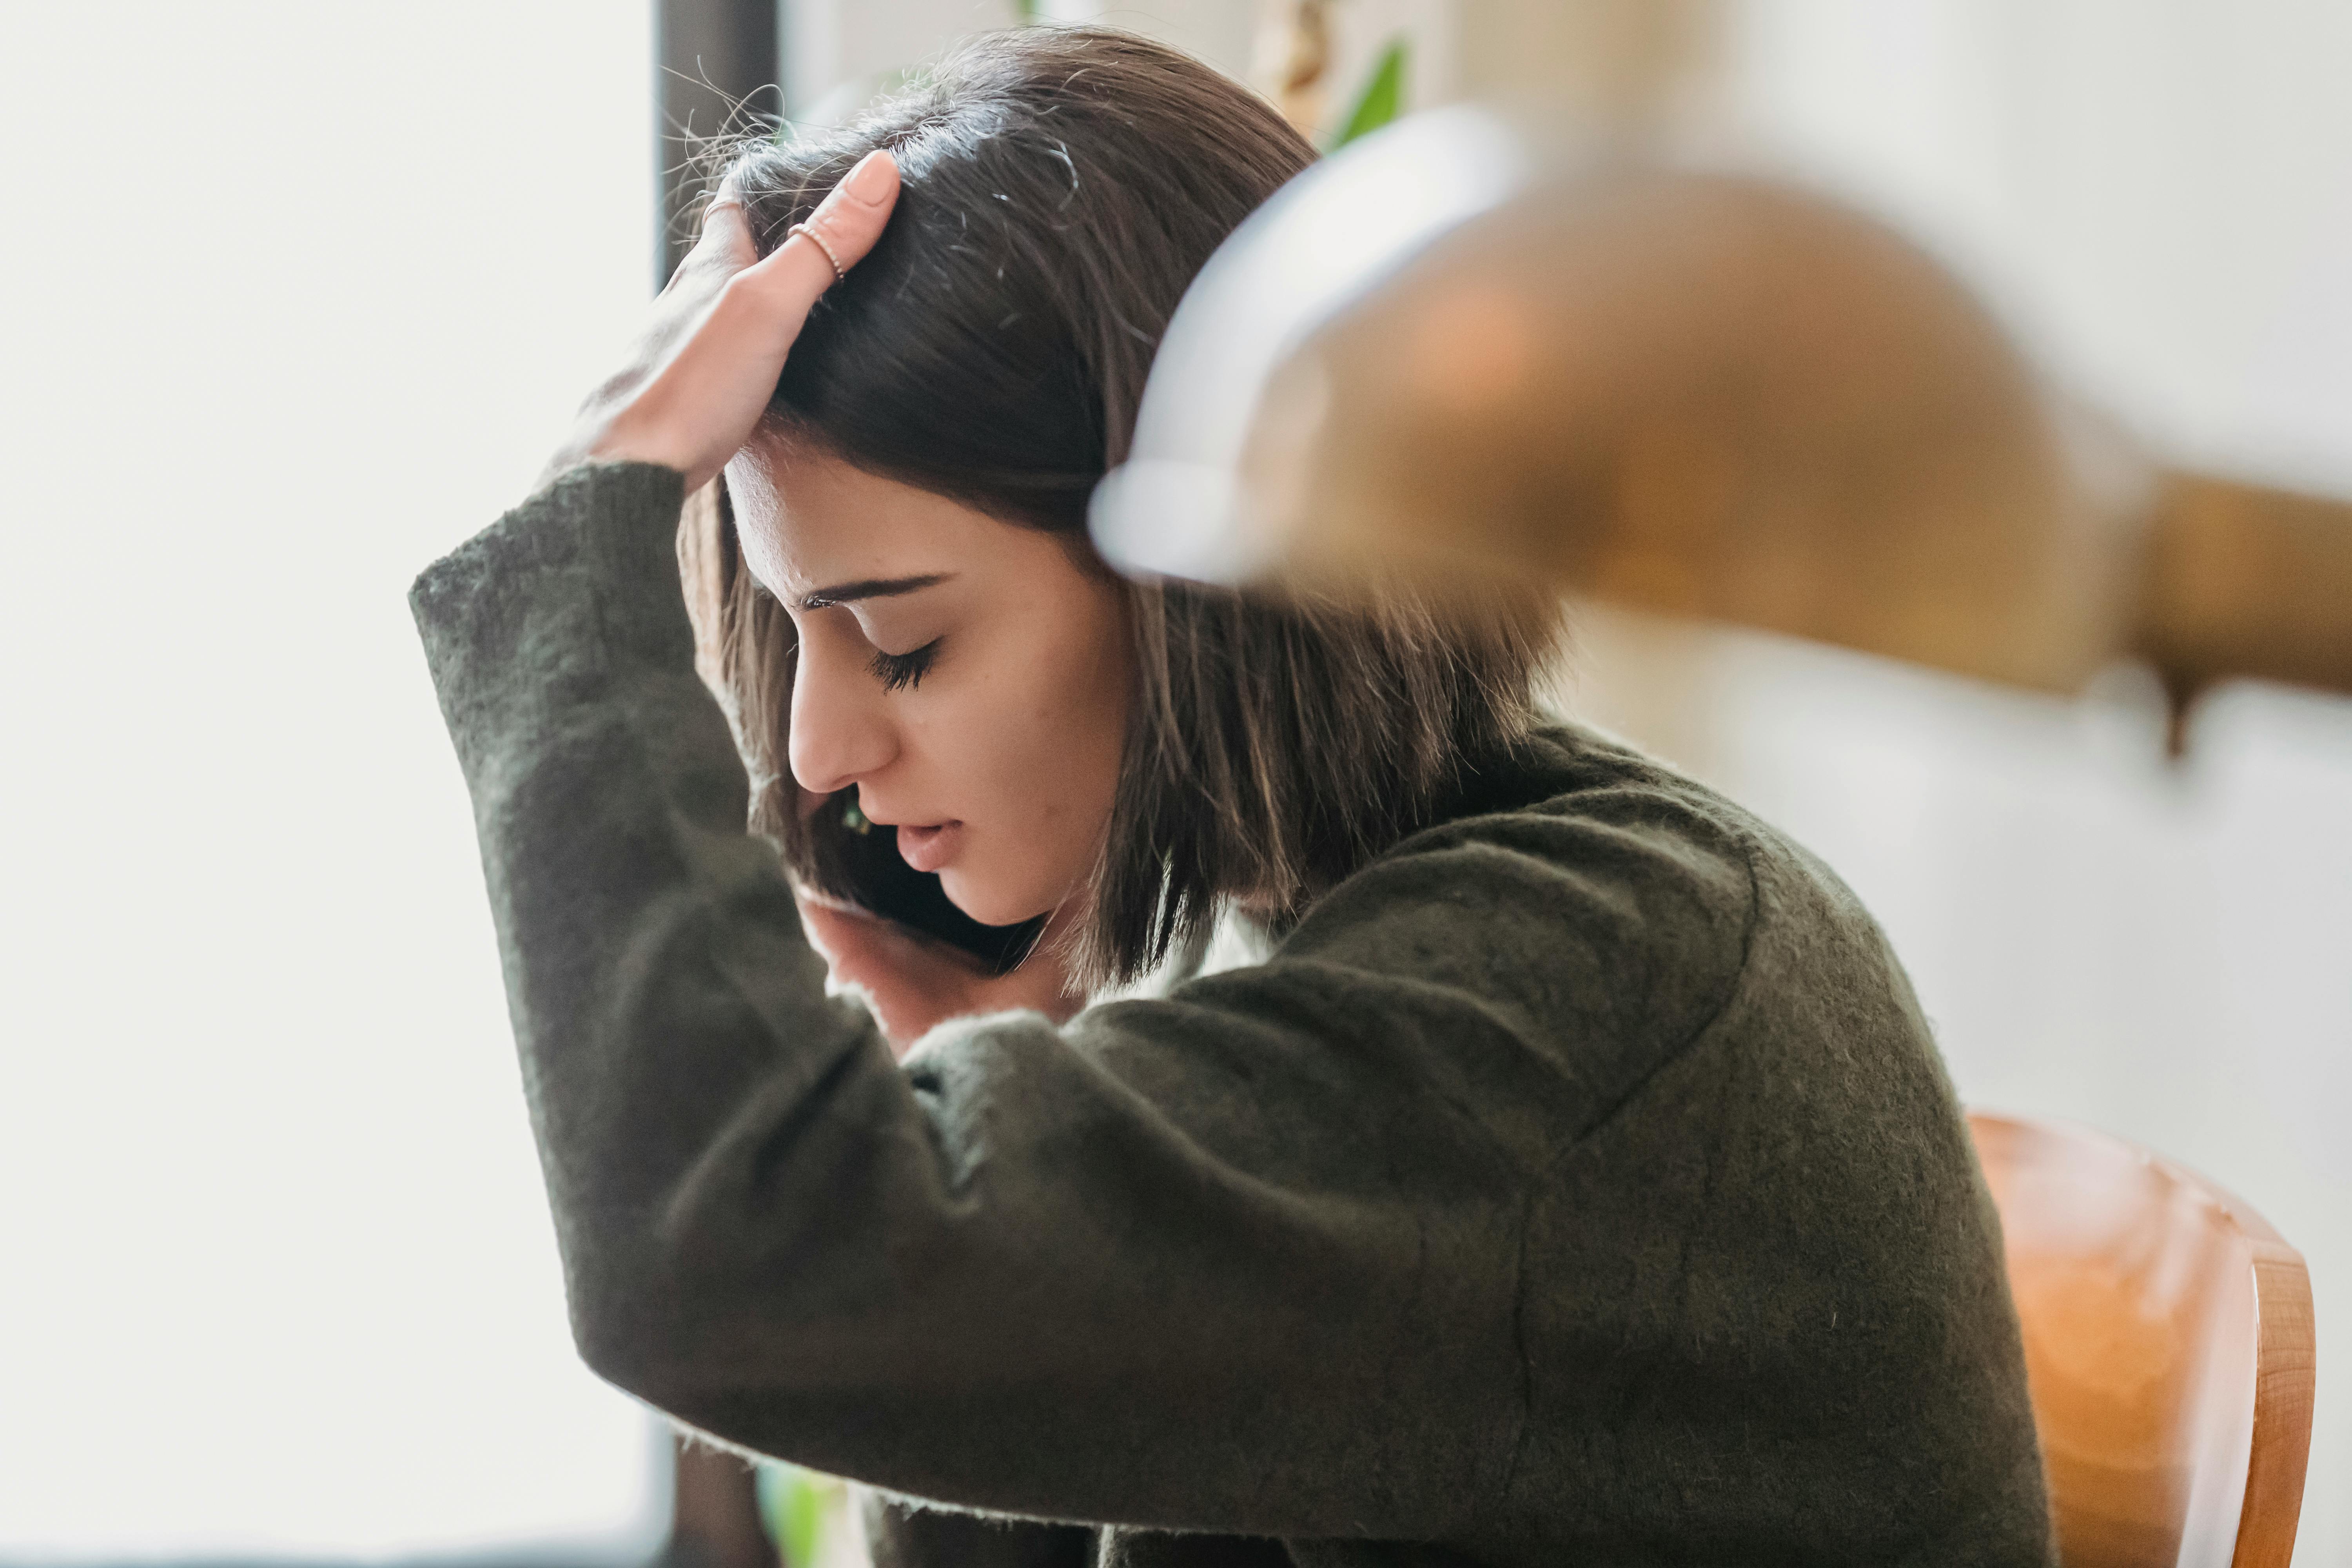 An upset woman talking to someone on the phone | Source: Pexels